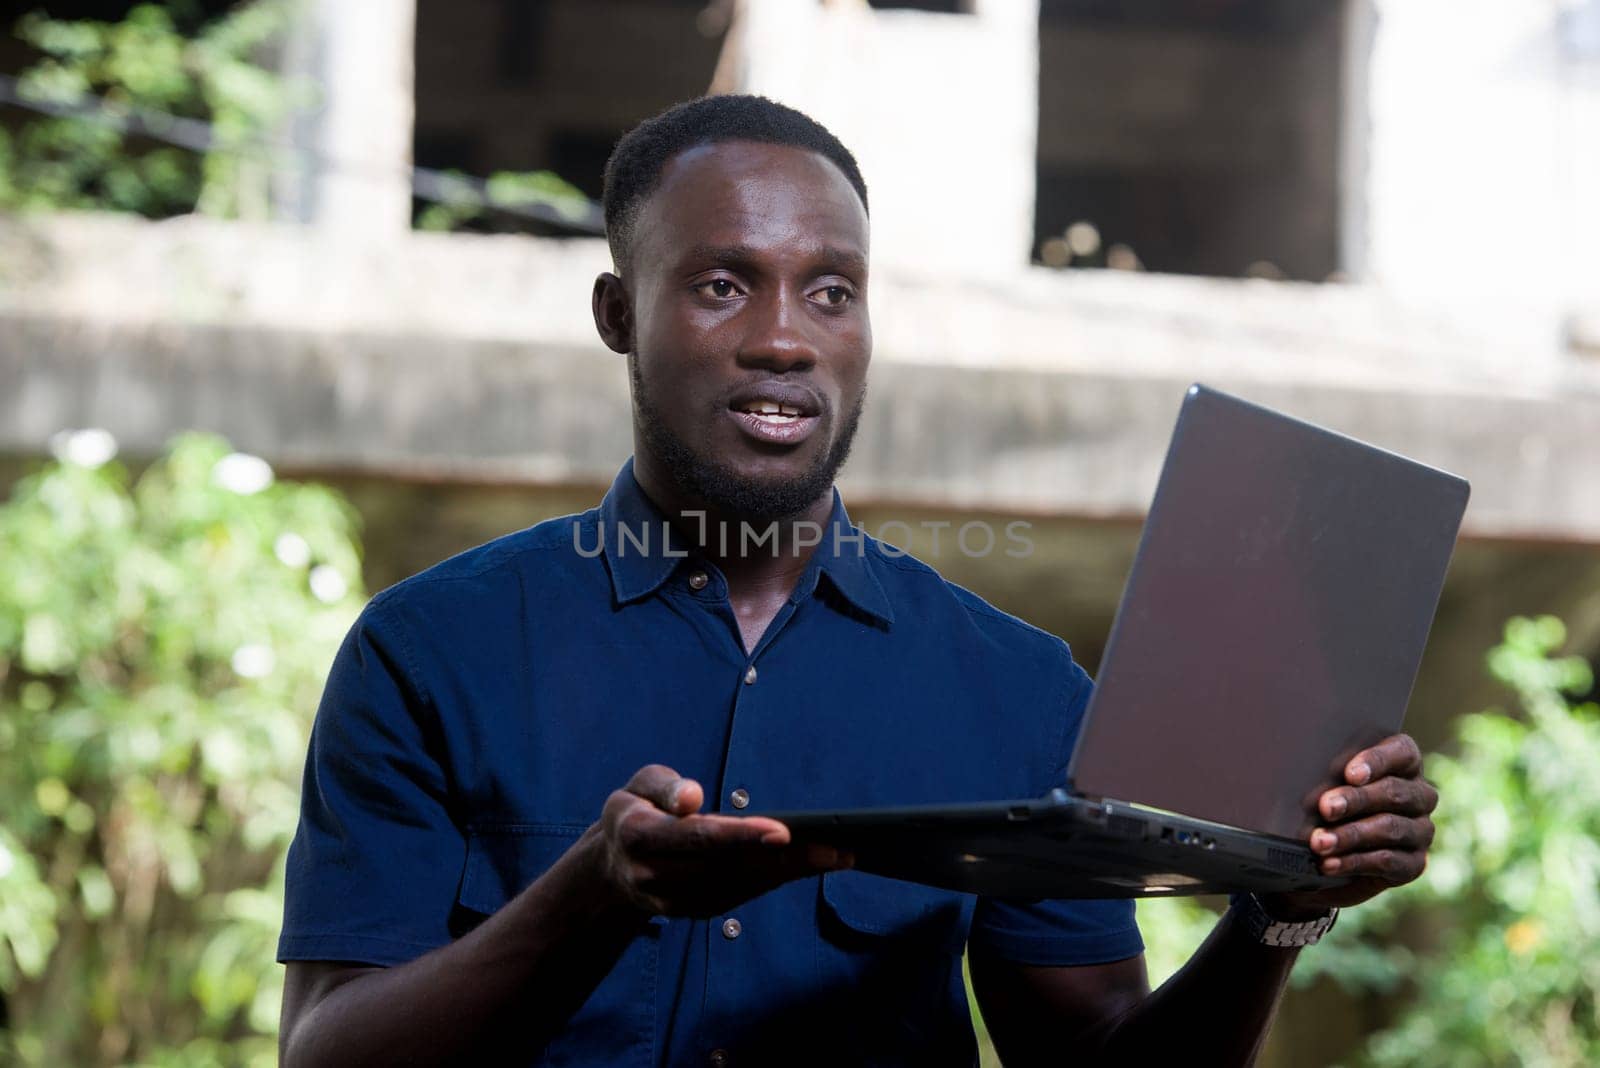 young man sitting outdoors presenting laptop while smiling.